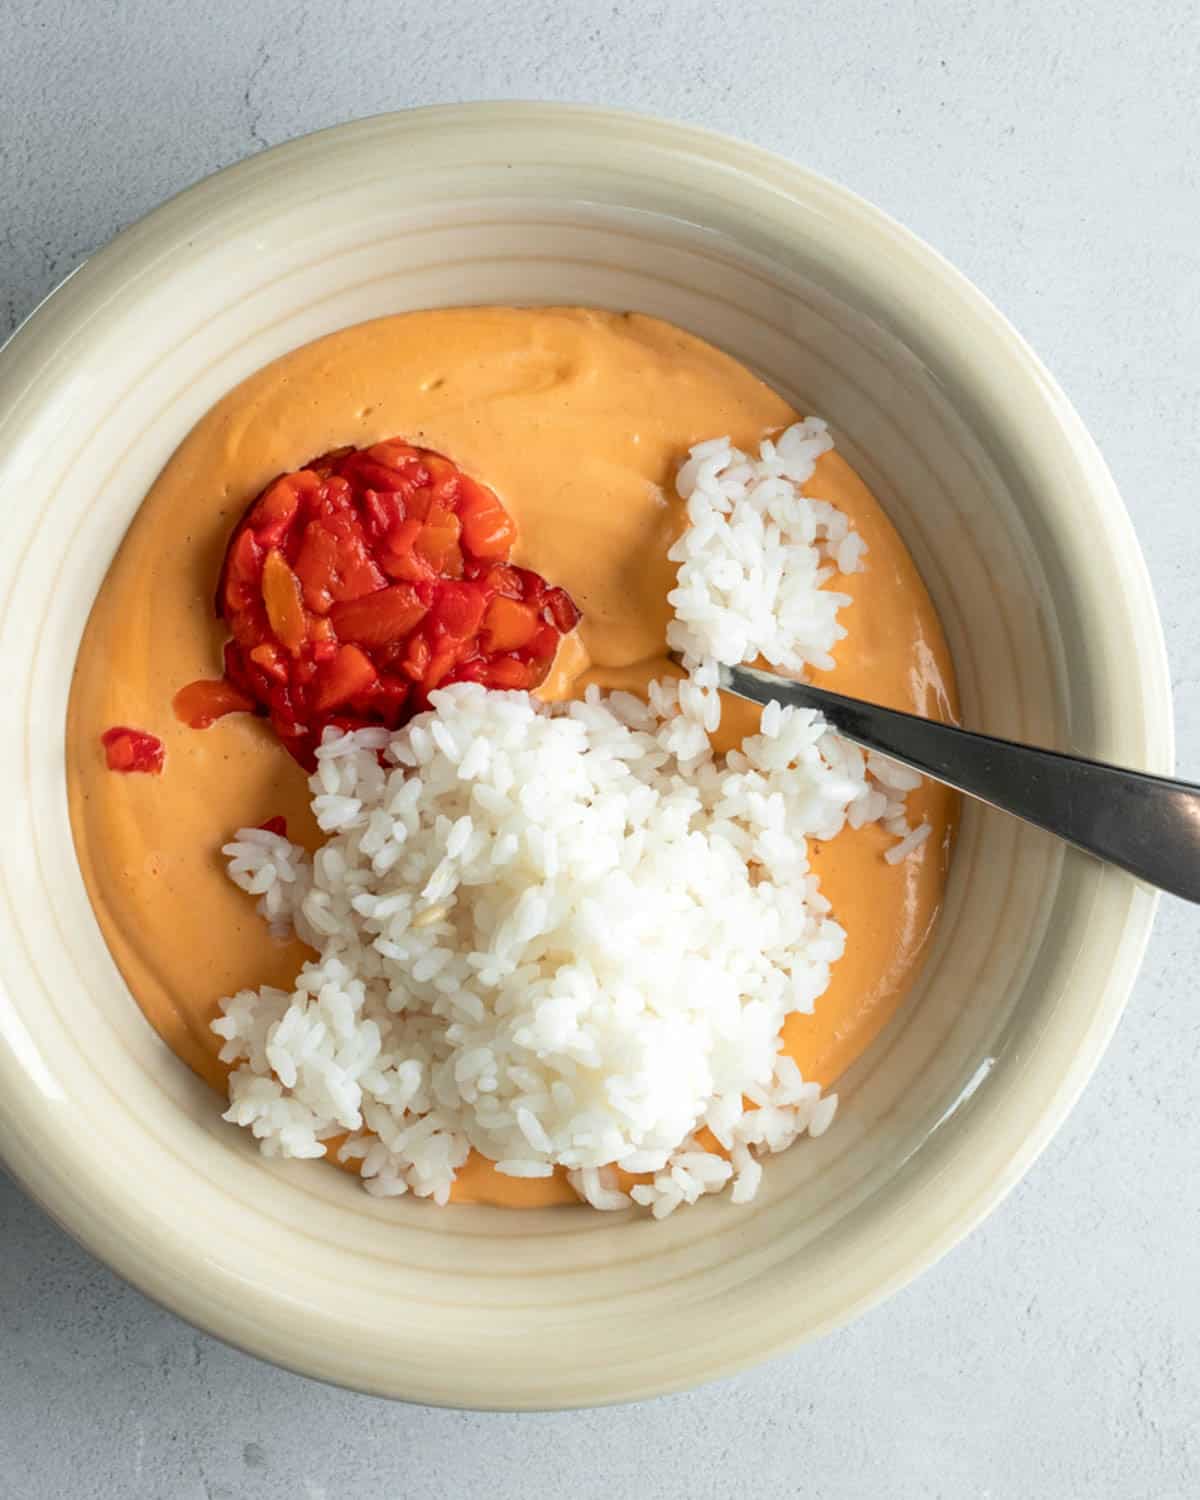 The blended pimento cashew sauce in a bowl with the rice and diced pimentos.